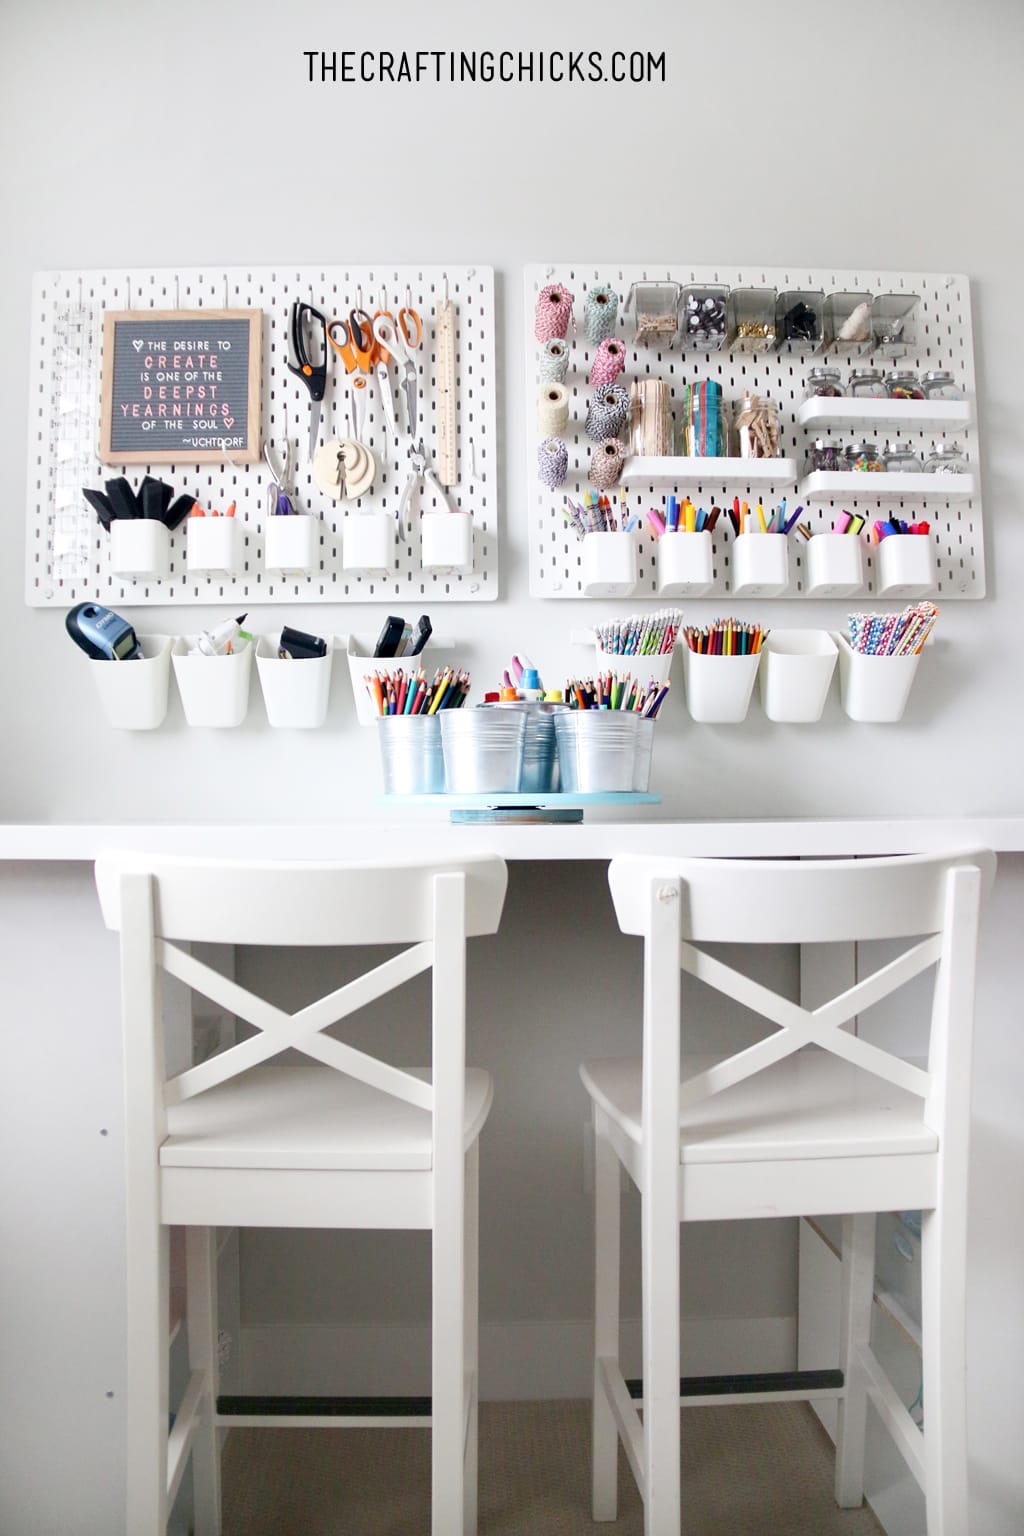 Wall with white peg board and craft supplies on it. Table and white stools in front for a crafting space.